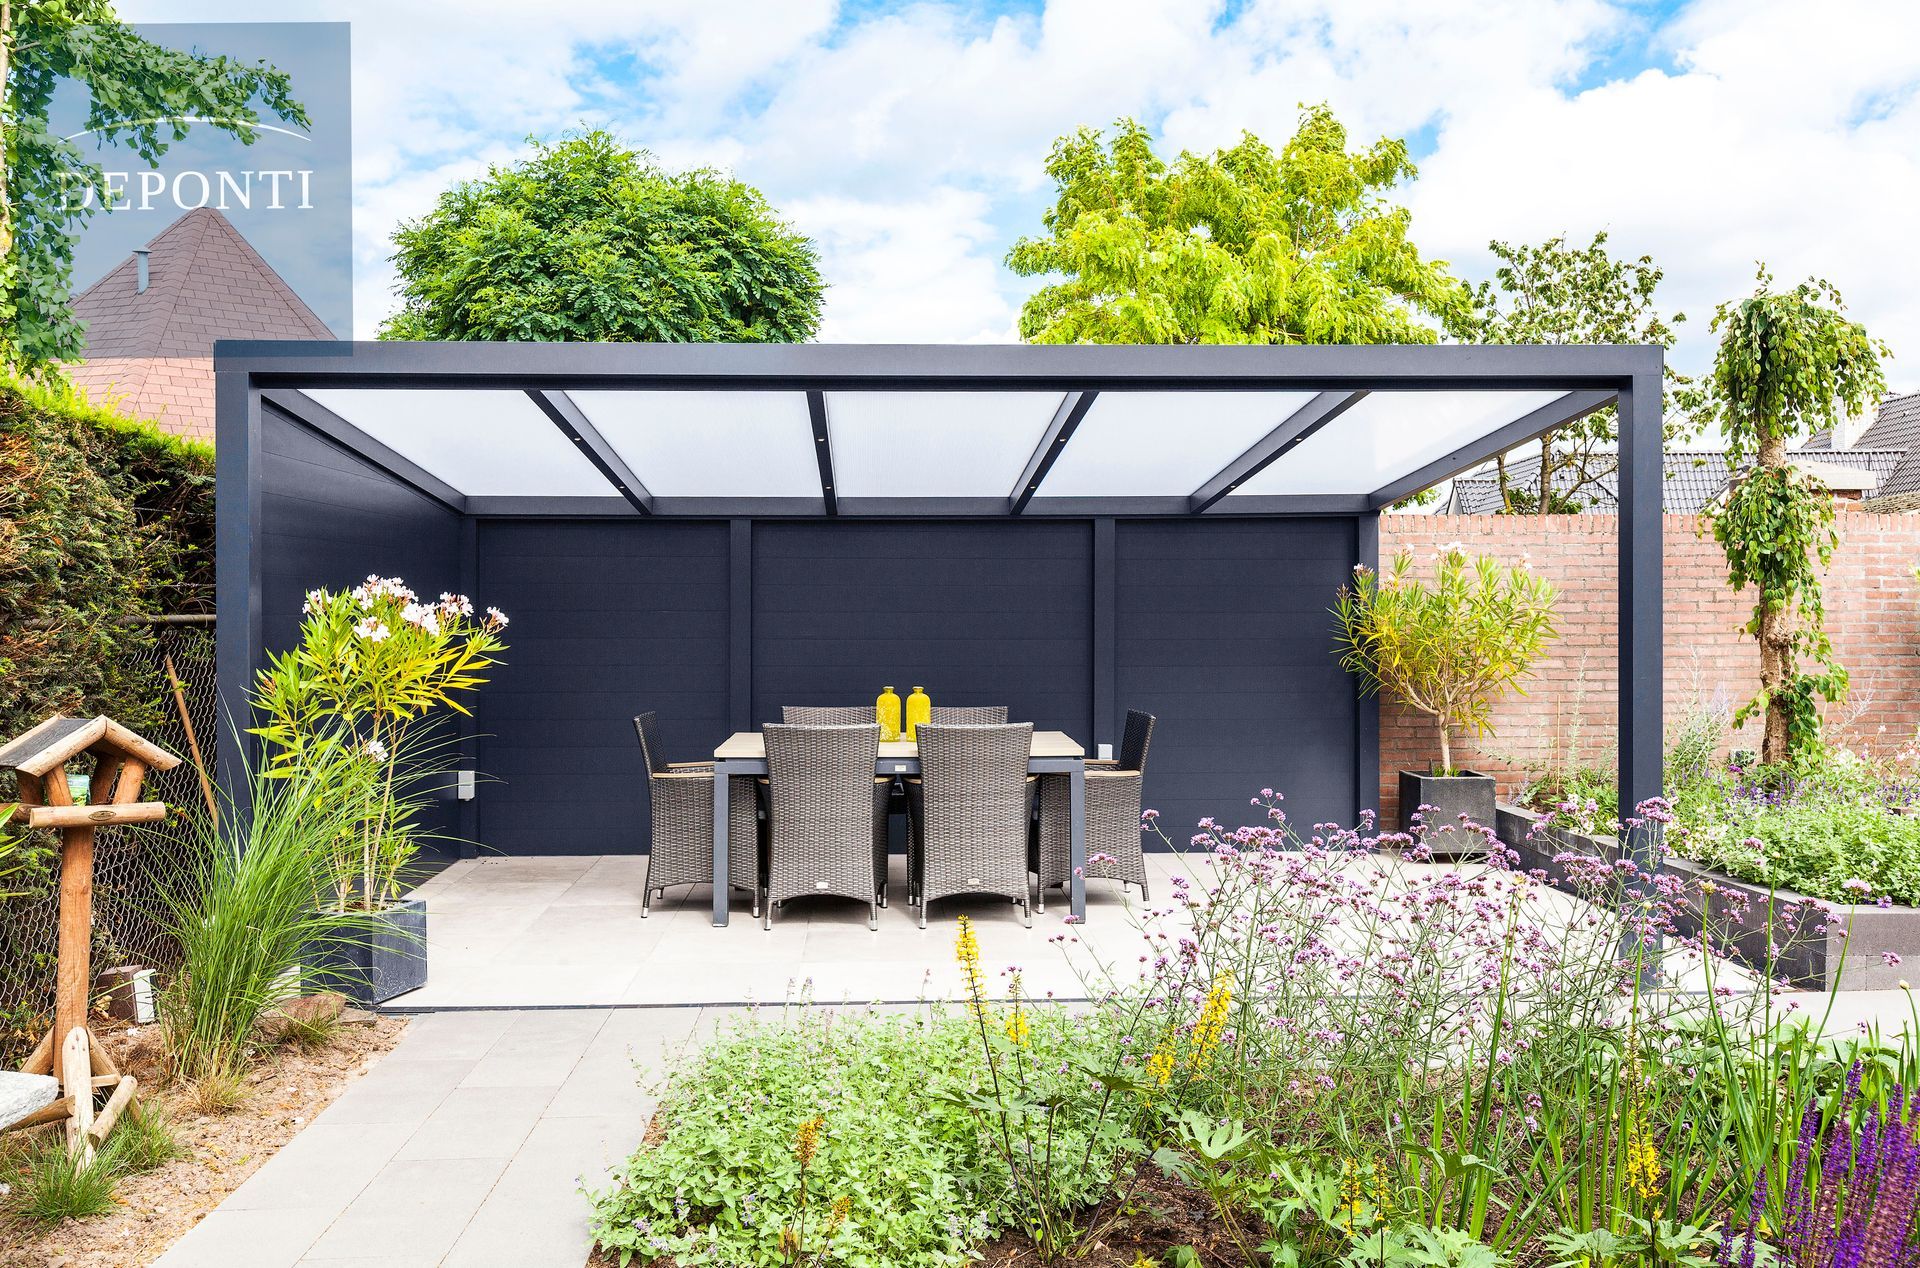 Garden Deponti aluminium veranda with a table and chairs under the canopy